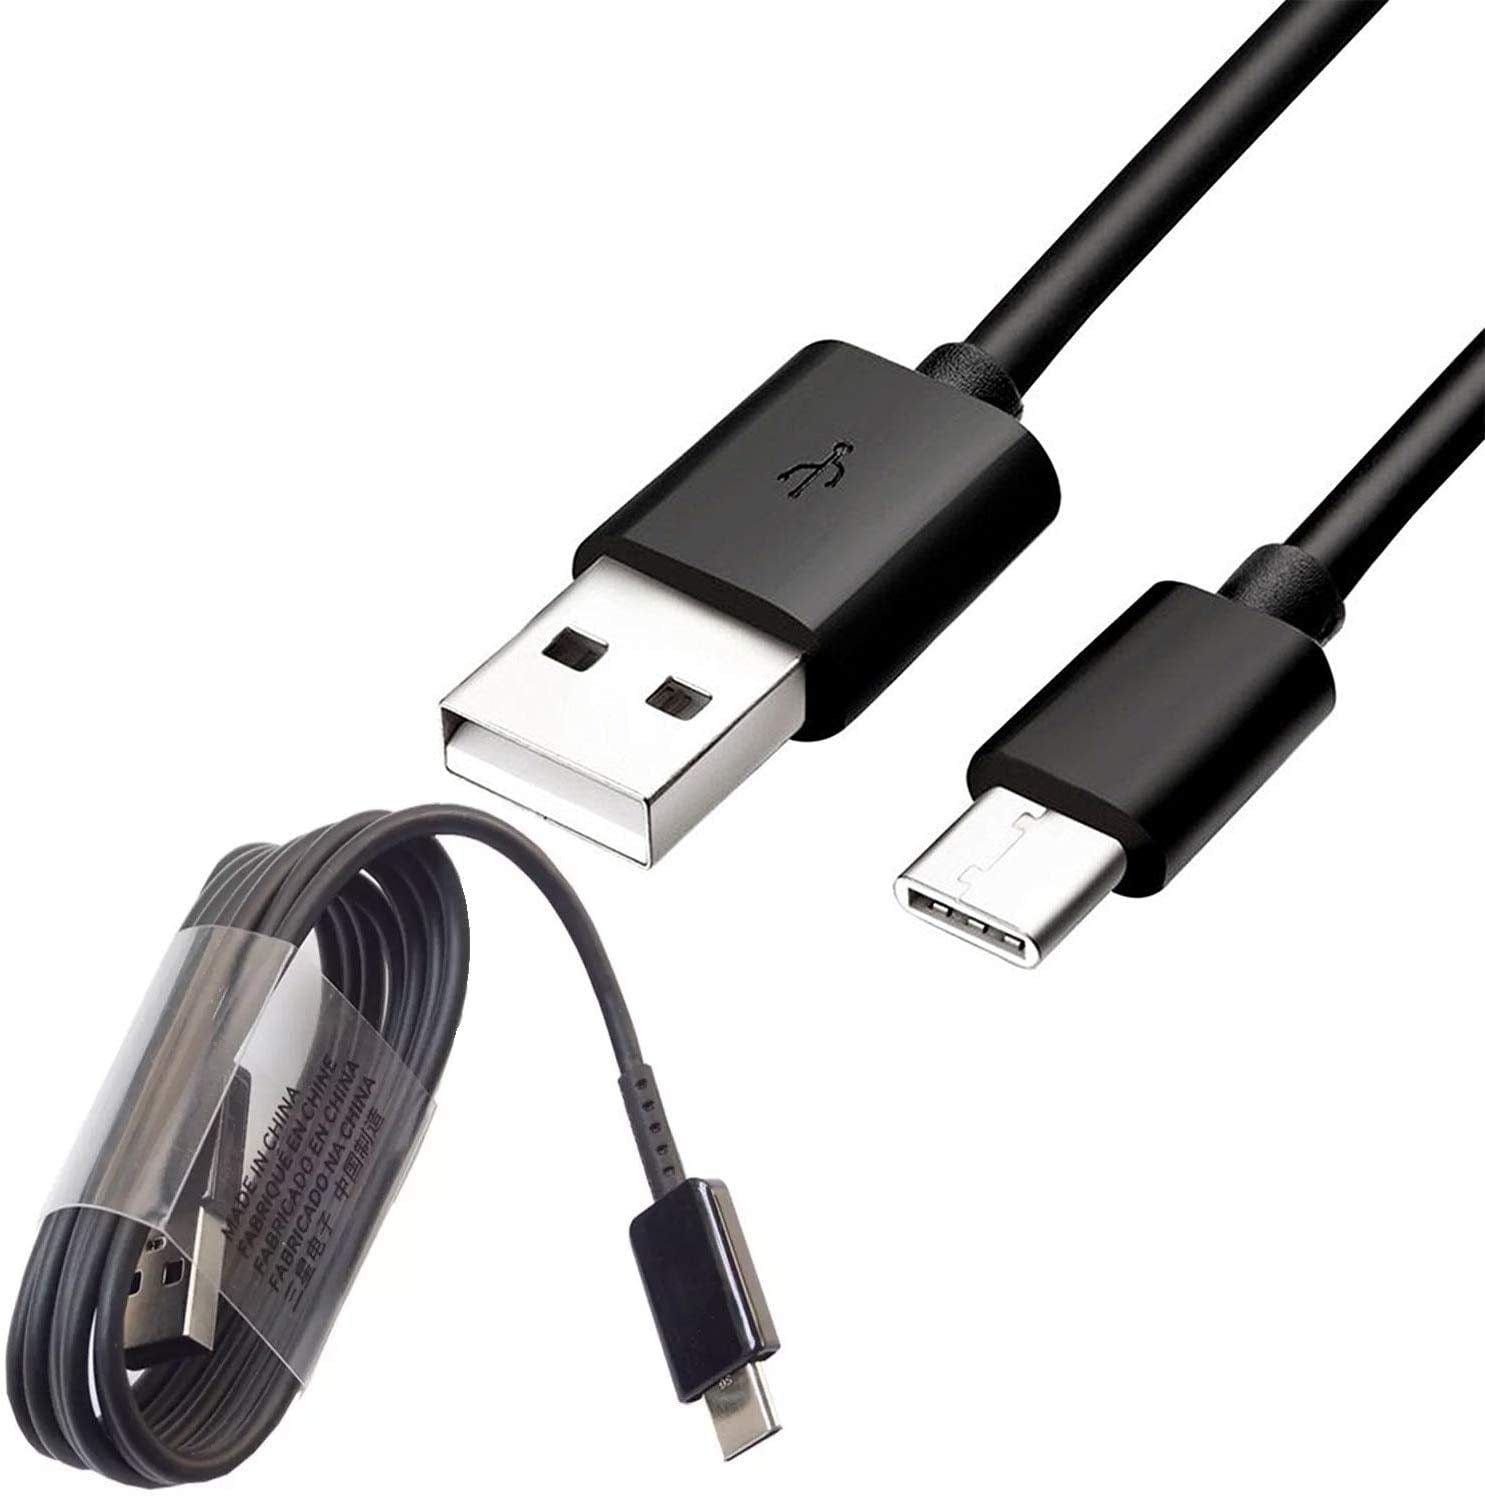 Samsung Galaxy A20e USB to Type C Charging Cable Lead Black - 2M - SmartPhoneGadgetUK